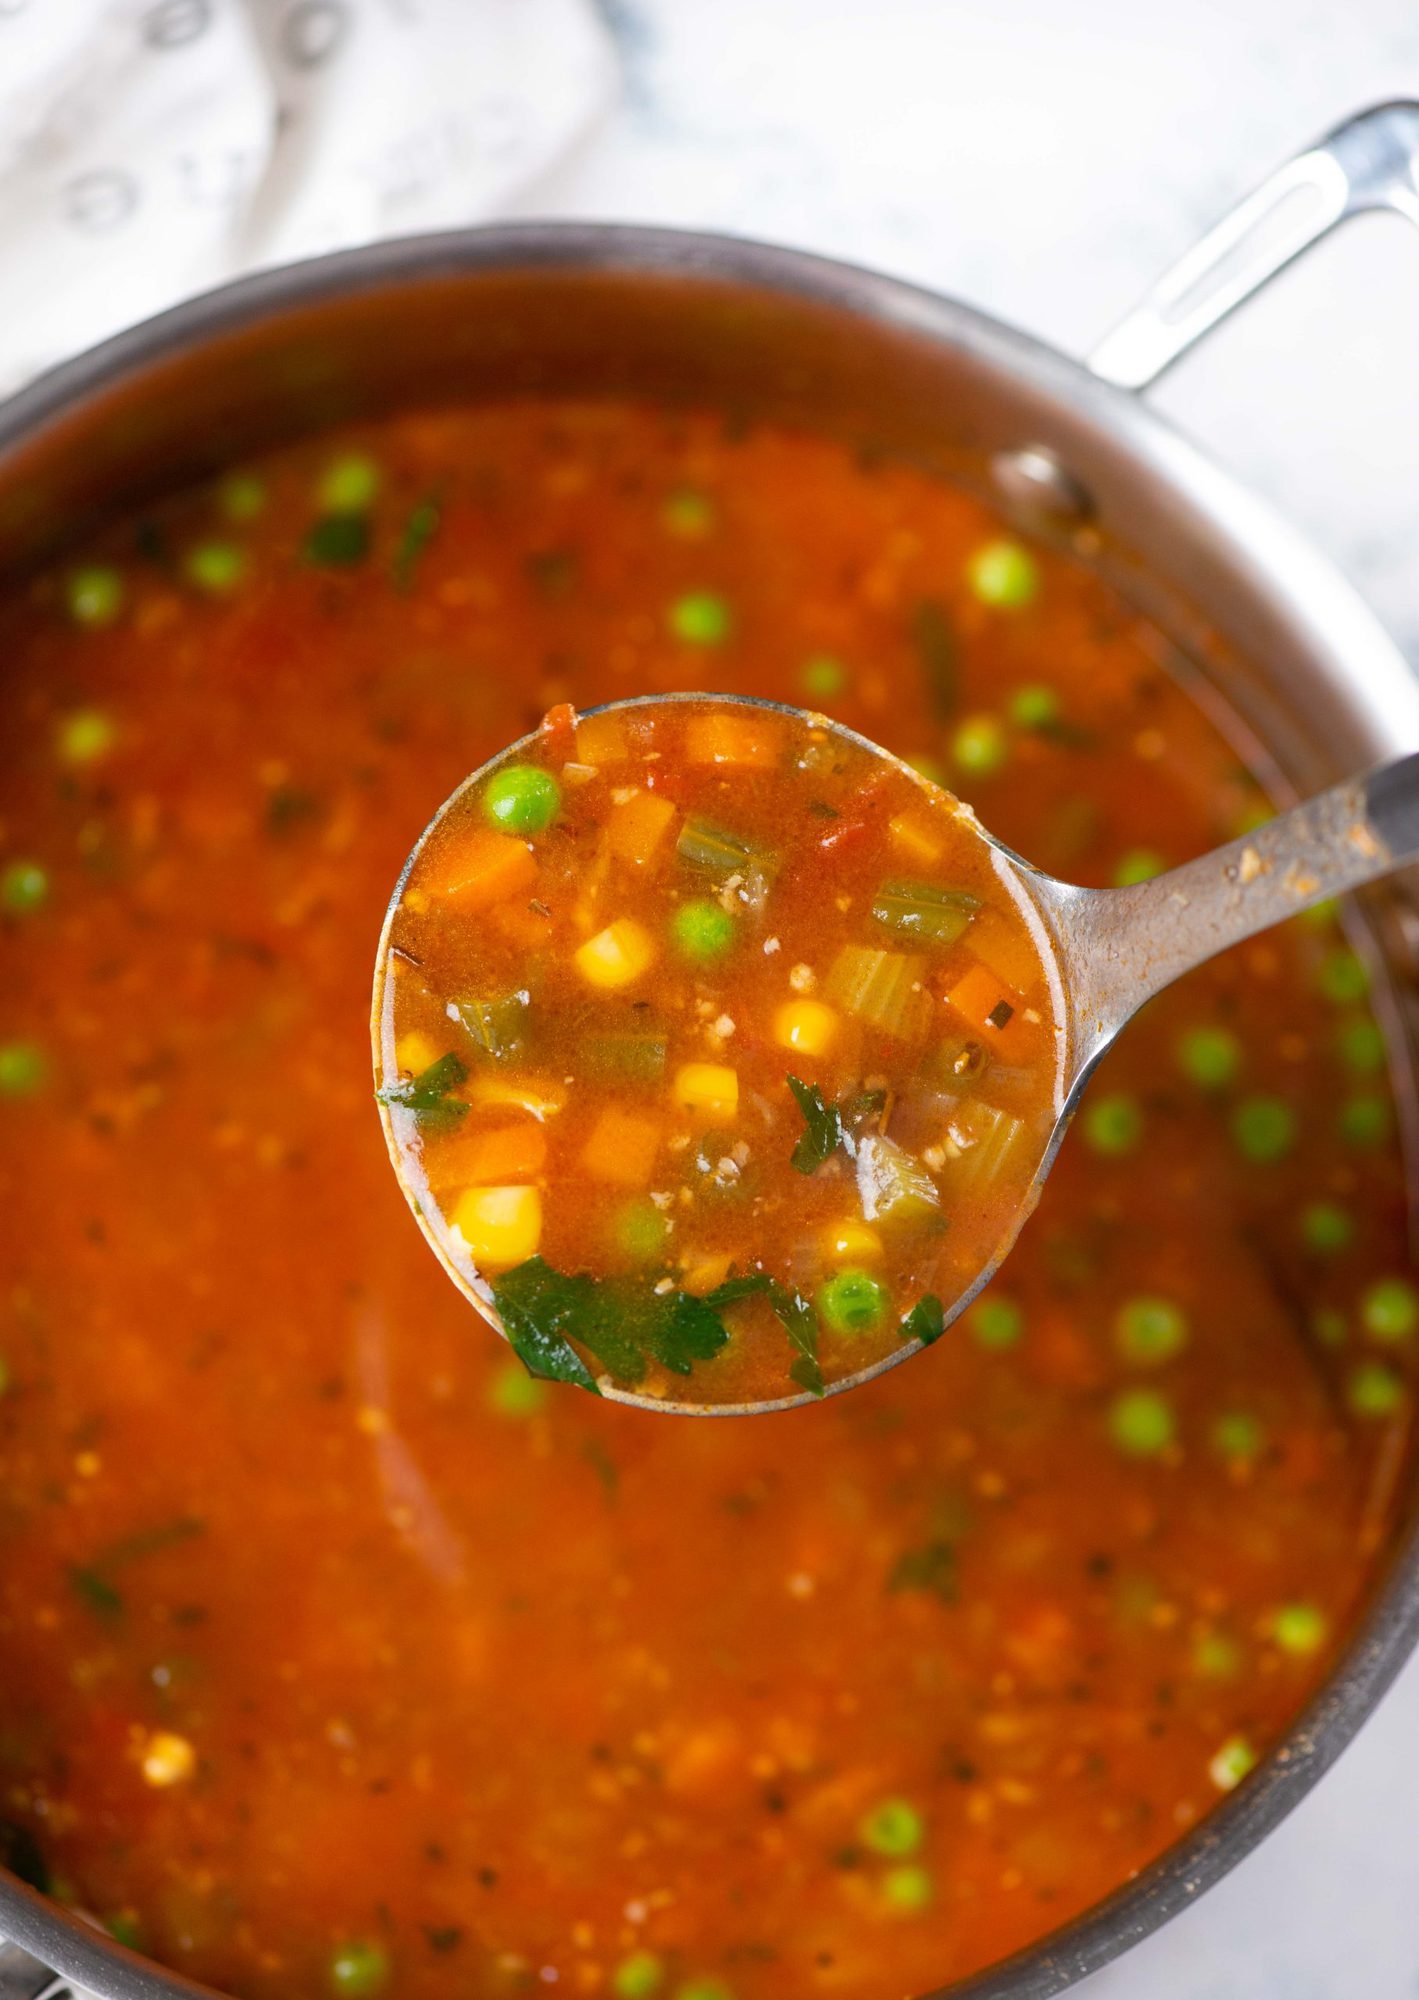 Vegetable soup made of potatoes, carrots, peas and beans shown in a ladle. 